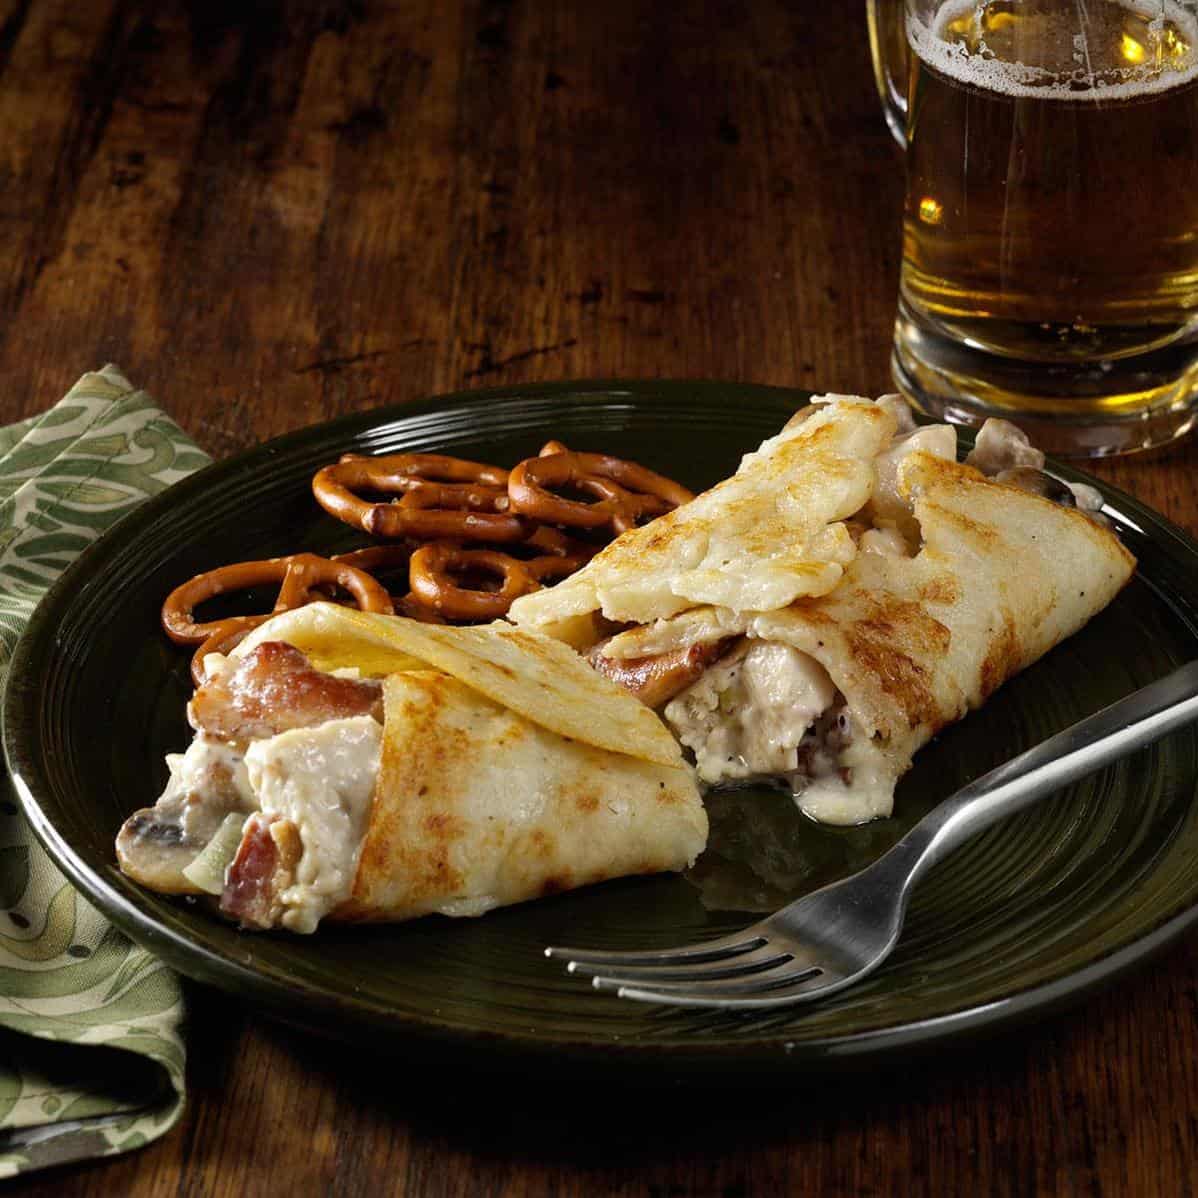  Let's make some magic happen in the kitchen with this boxty recipe.